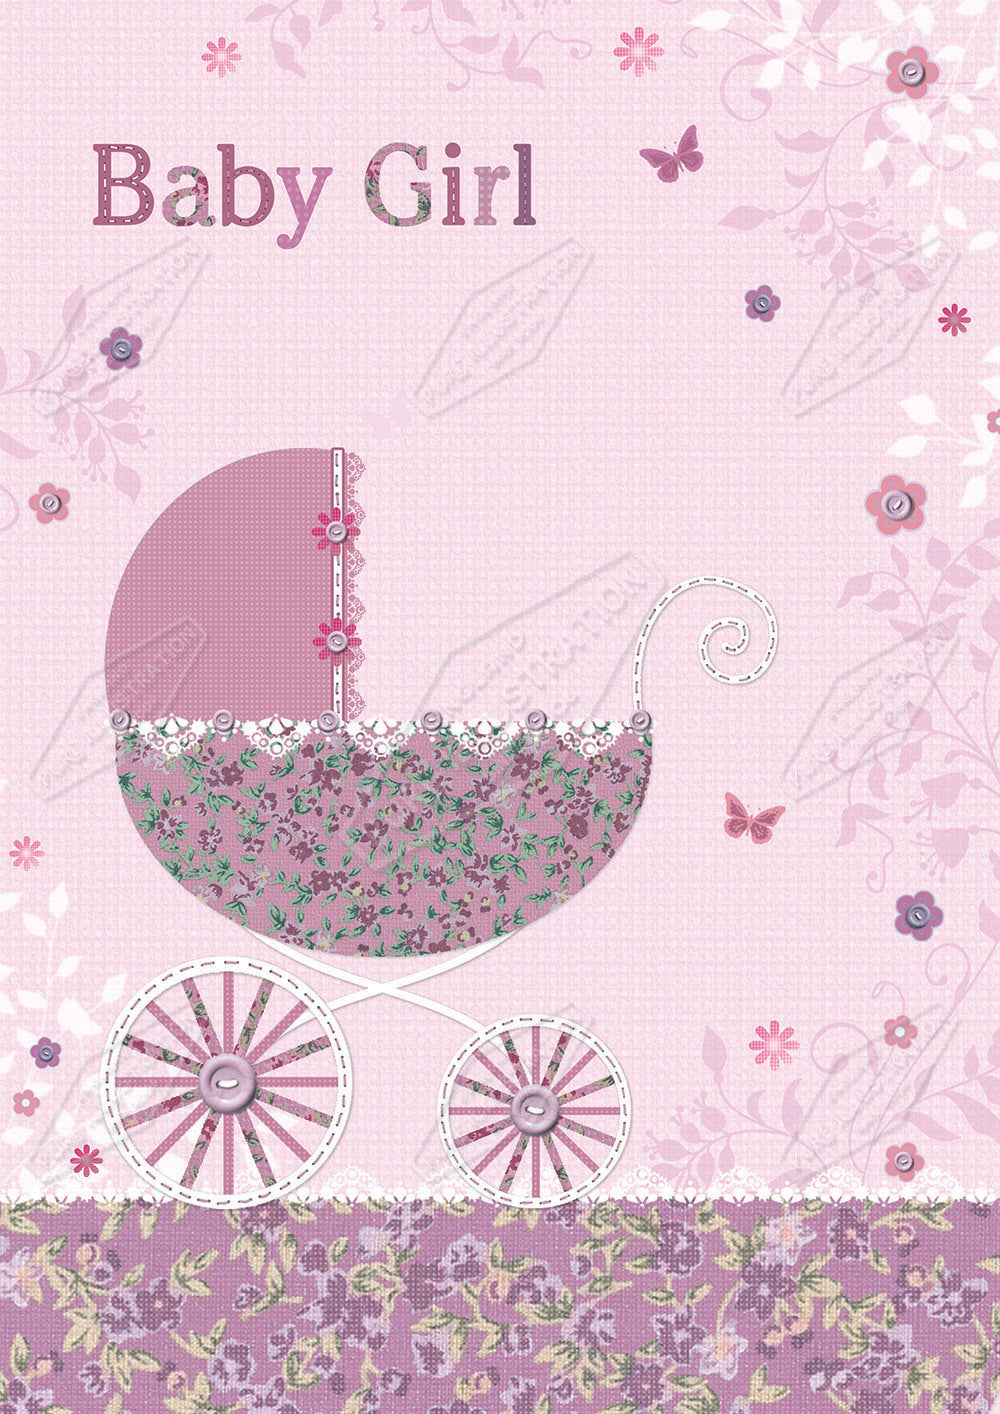 00030127KSP- Kerry Spurling is represented by Pure Art Licensing Agency - New Baby Greeting Card Design